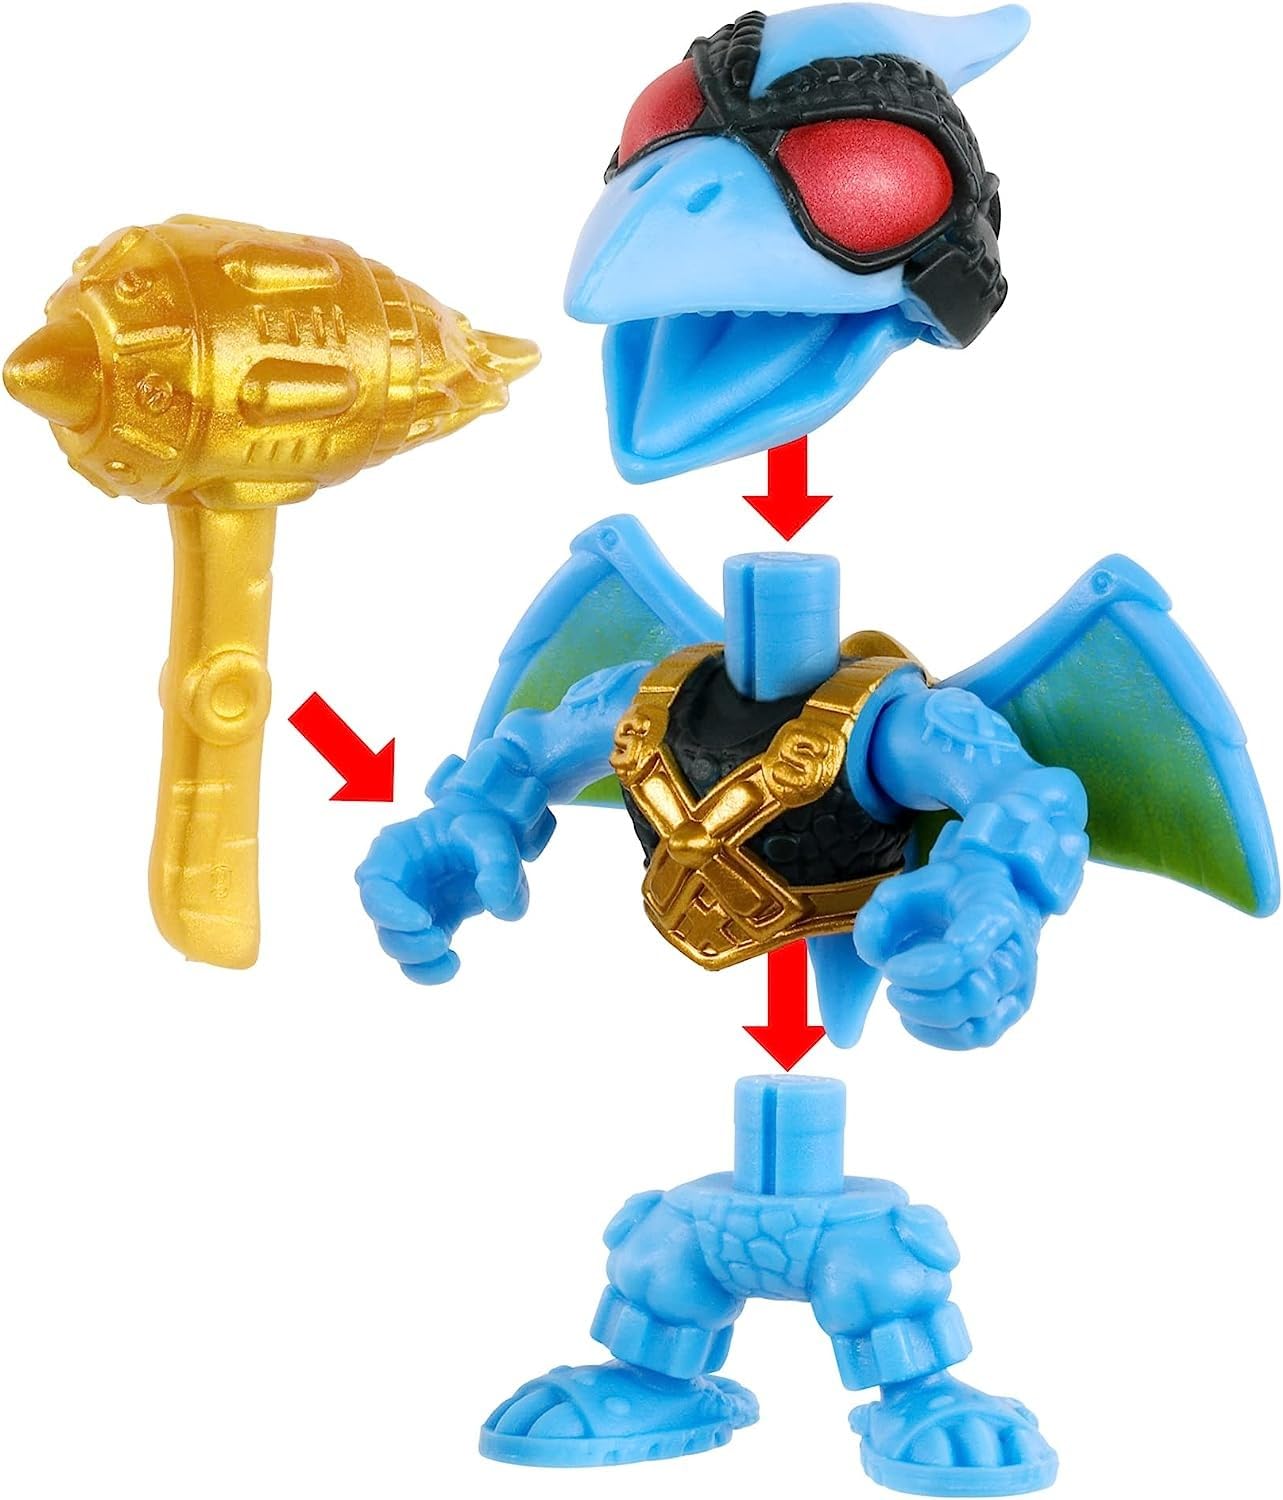 Treasure X Dino Gold Armored Egg. Break The Egg. Squeeze The Ooze Out. Smash The Fossil to Find The Treasure. Then Build The Dino and Display. Styles May Vary